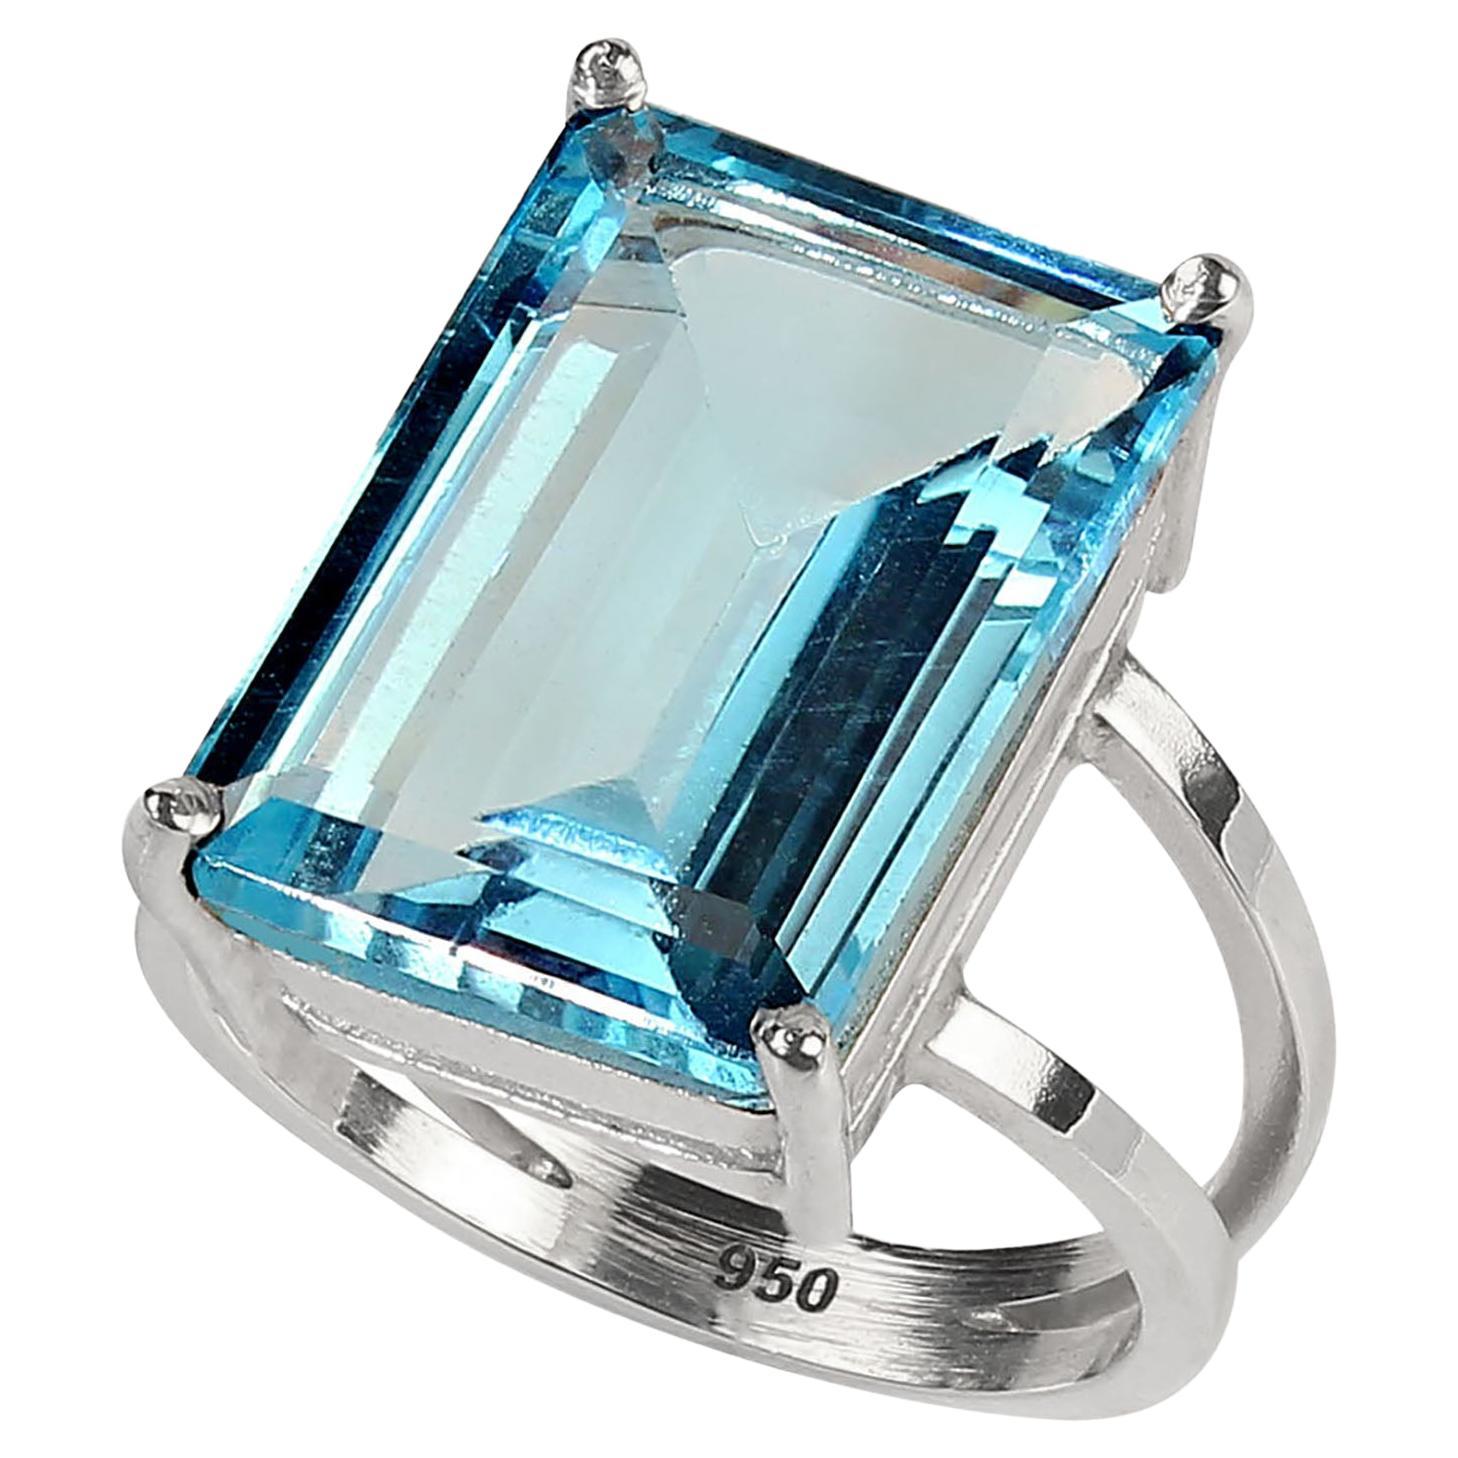 Exciting 16Ct emerald cut Sky Blue Topaz in Sterling Silver ring. This handmade ring is perfectly created to display this sparkly 18x13MM Sky Blue Topaz.  This ring is handmade in the studio of favorite vendor in Belo Horizonte, Minas Gerais,